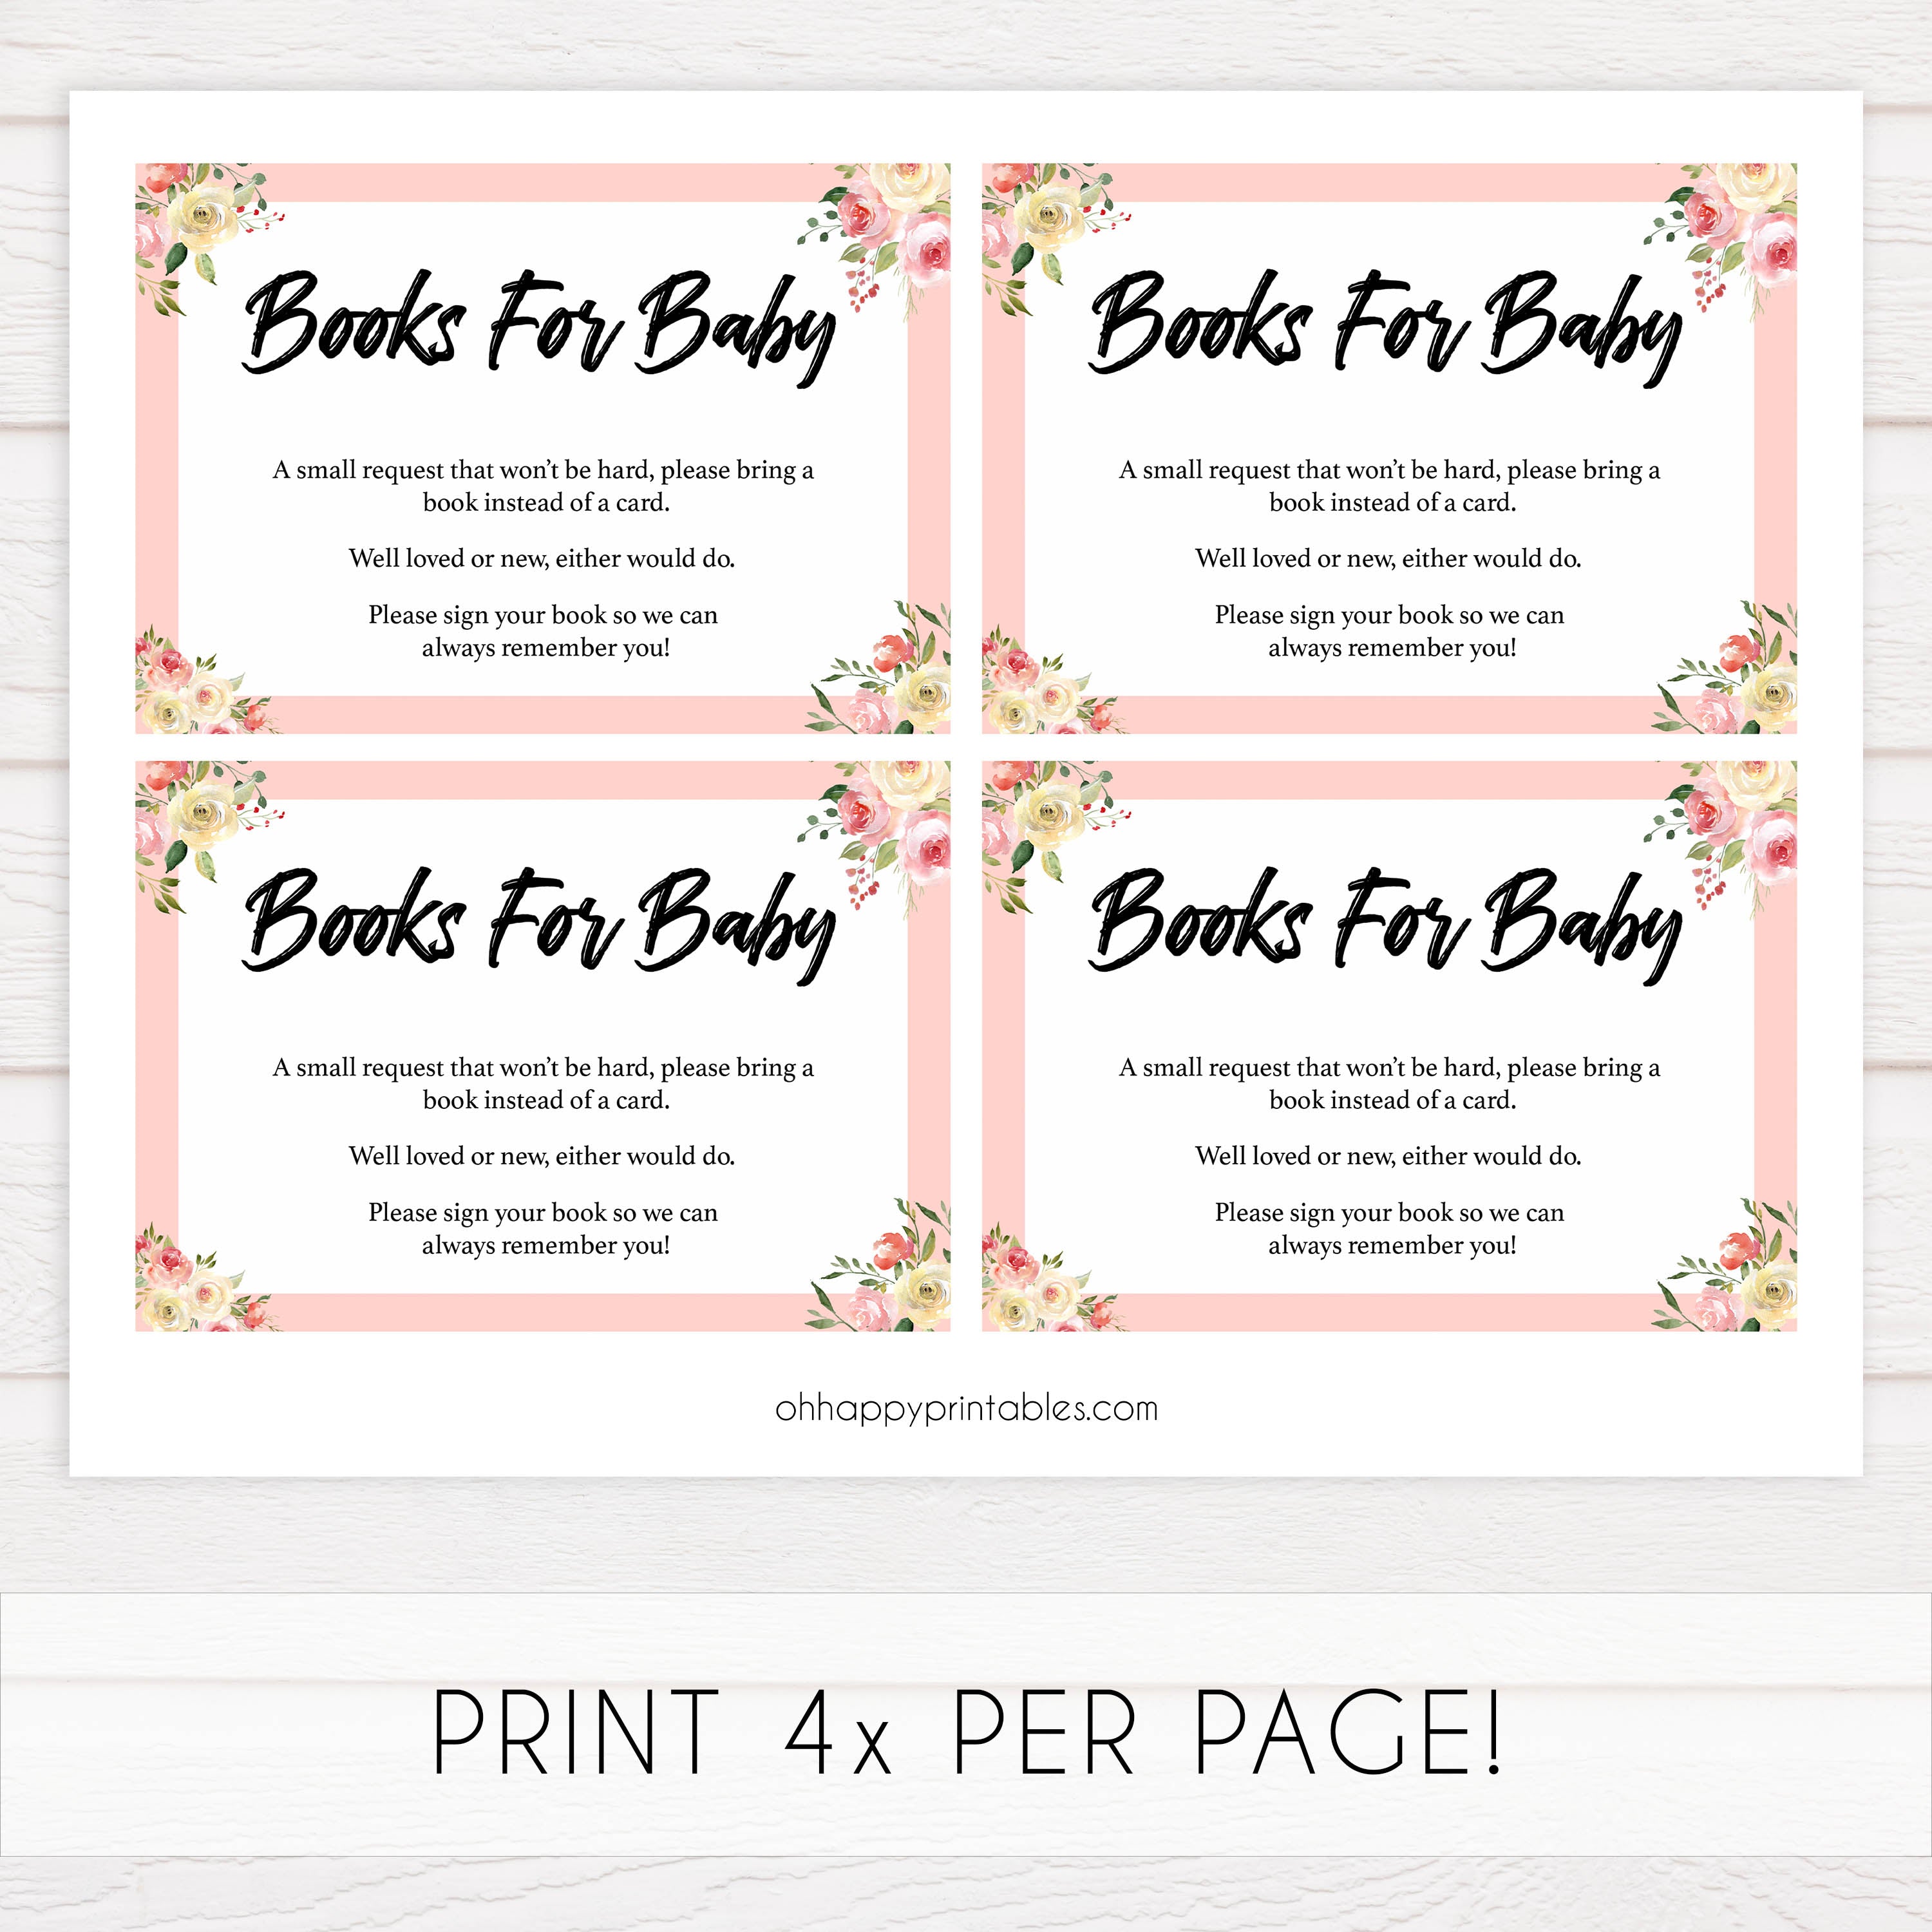 books for baby, bring a book, Printable baby shower games, floral fun baby games, baby shower games, fun baby shower ideas, top baby shower ideas, floral baby shower, blue baby shower ideas